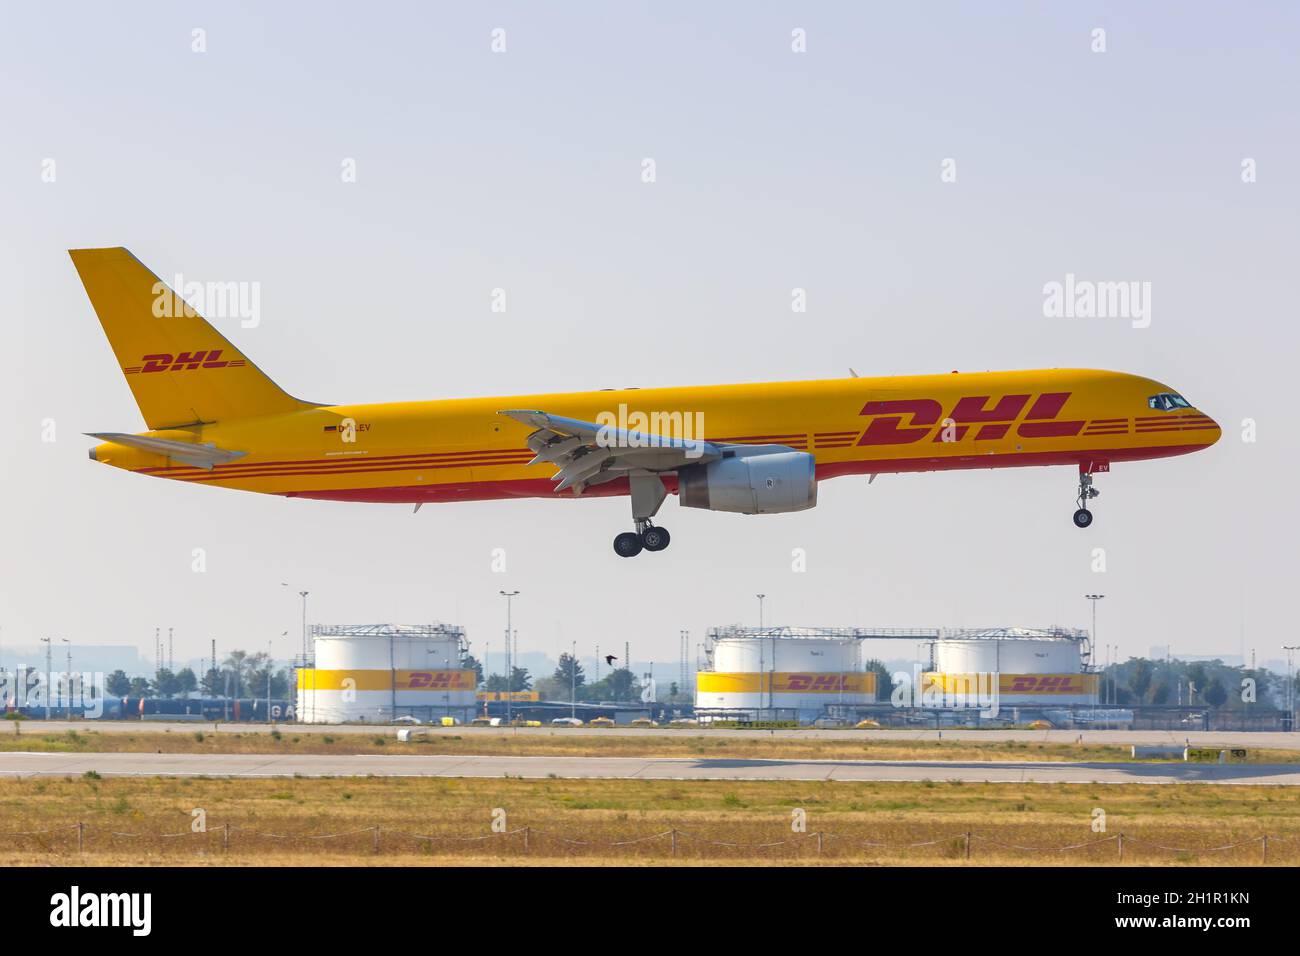 Leipzig, Germany - August 19, 2020: DHL Boeing 757-200(PCF) airplane at Leipzig Halle Airport (LEJ) in Germany. Stock Photo